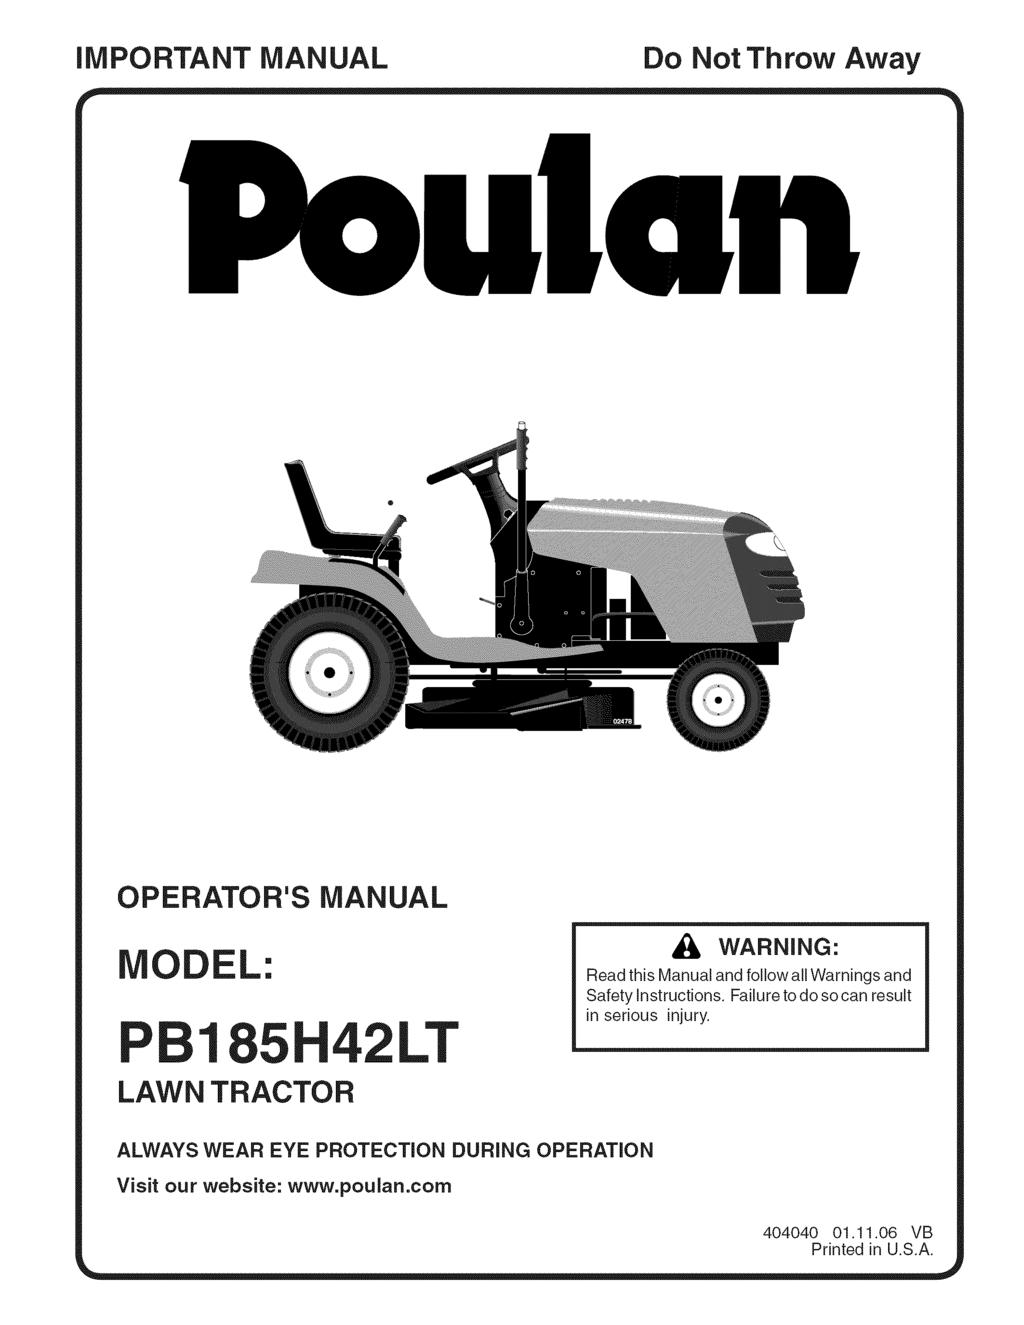 important MANUAL Do Not Throw Away OPERATOR'S MANUAL P 1 L: LAWN TRACTOR LT _k, WARNING: Read this Manual and follow all Warnings and Safety instructions.